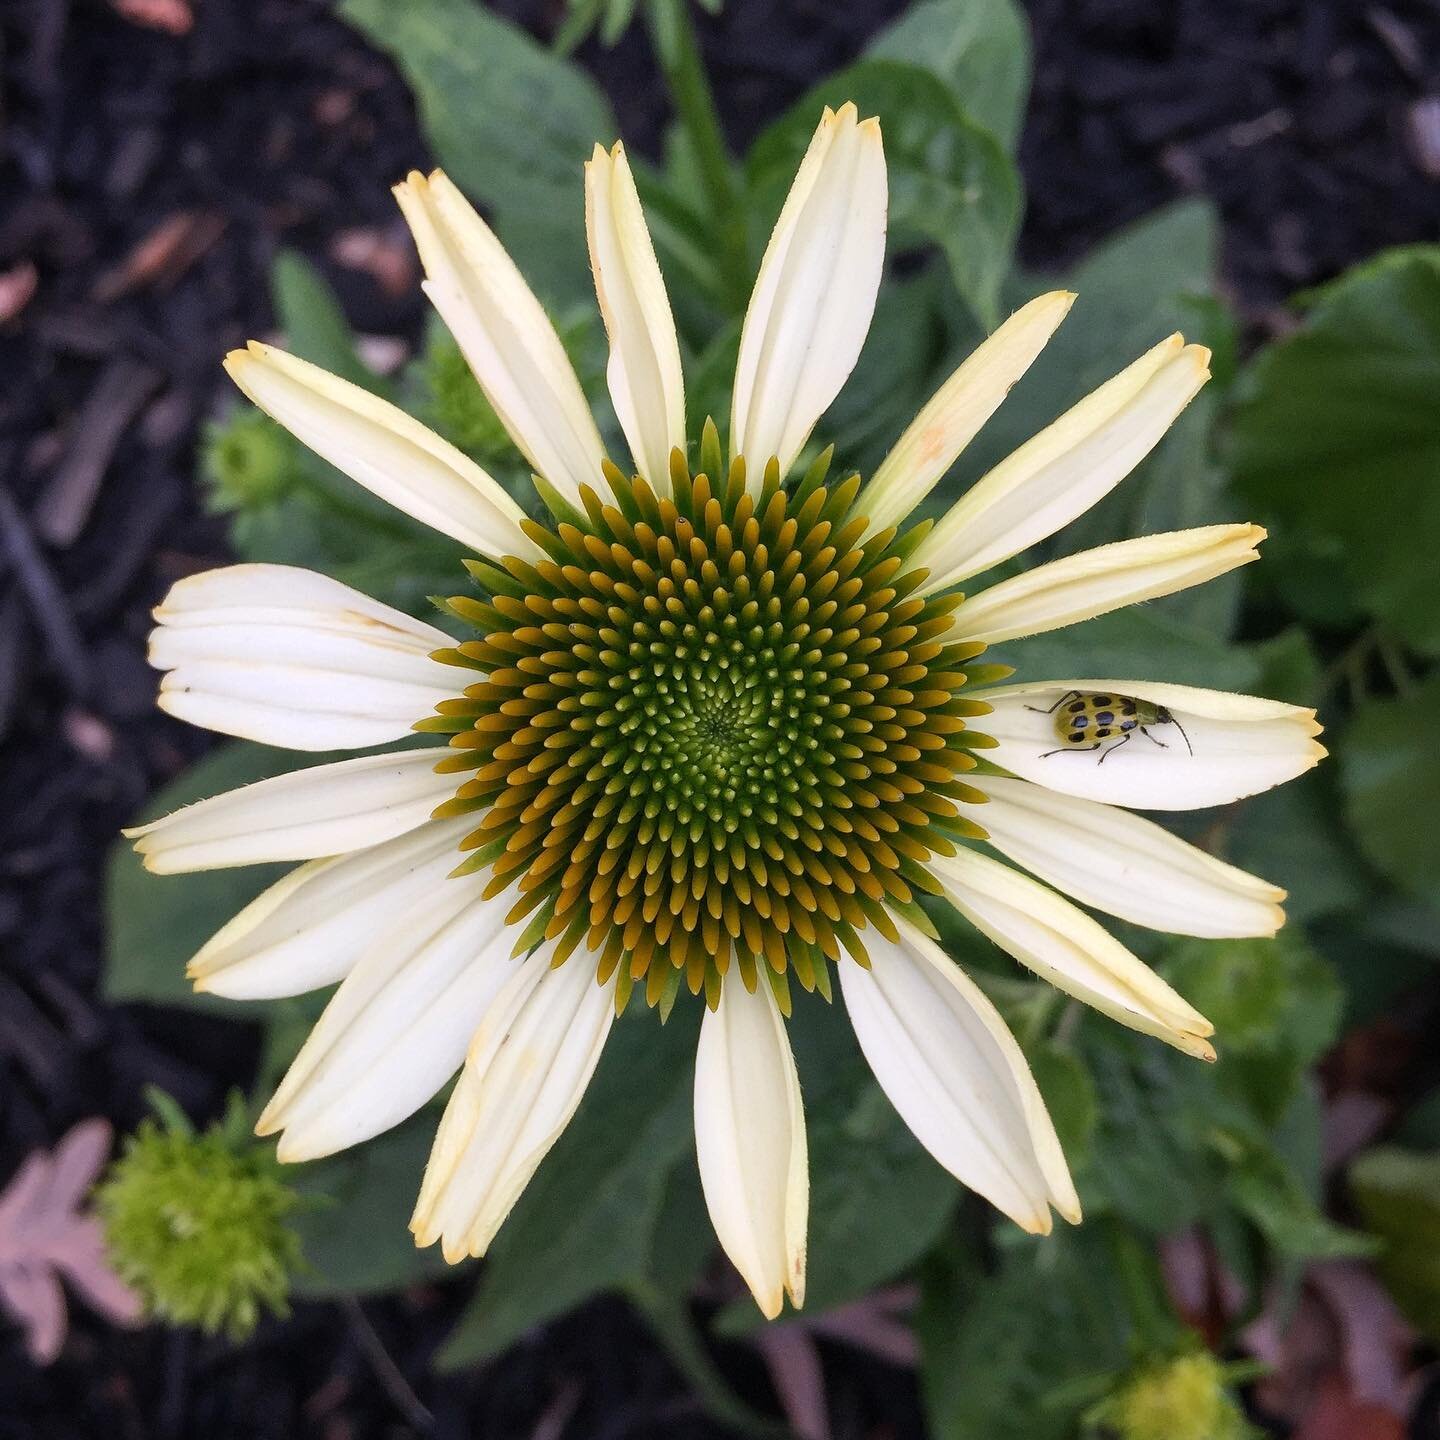 Thinking back to times of beautiful growth on our grounds. Like this white coneflower and its little insect friend.
.
.
How have you grown in the last year?
.
.
🌼 𝘌𝘤𝘩𝘪𝘯𝘢𝘤𝘦𝘢 𝘱𝘶𝘳𝘱𝘶𝘳𝘦𝘢
🐞 𝘋𝘪𝘢𝘣𝘳𝘰𝘵𝘪𝘤𝘢 𝘶𝘯𝘥𝘦𝘤𝘪𝘮𝘱𝘶𝘯𝘤𝘵𝘢